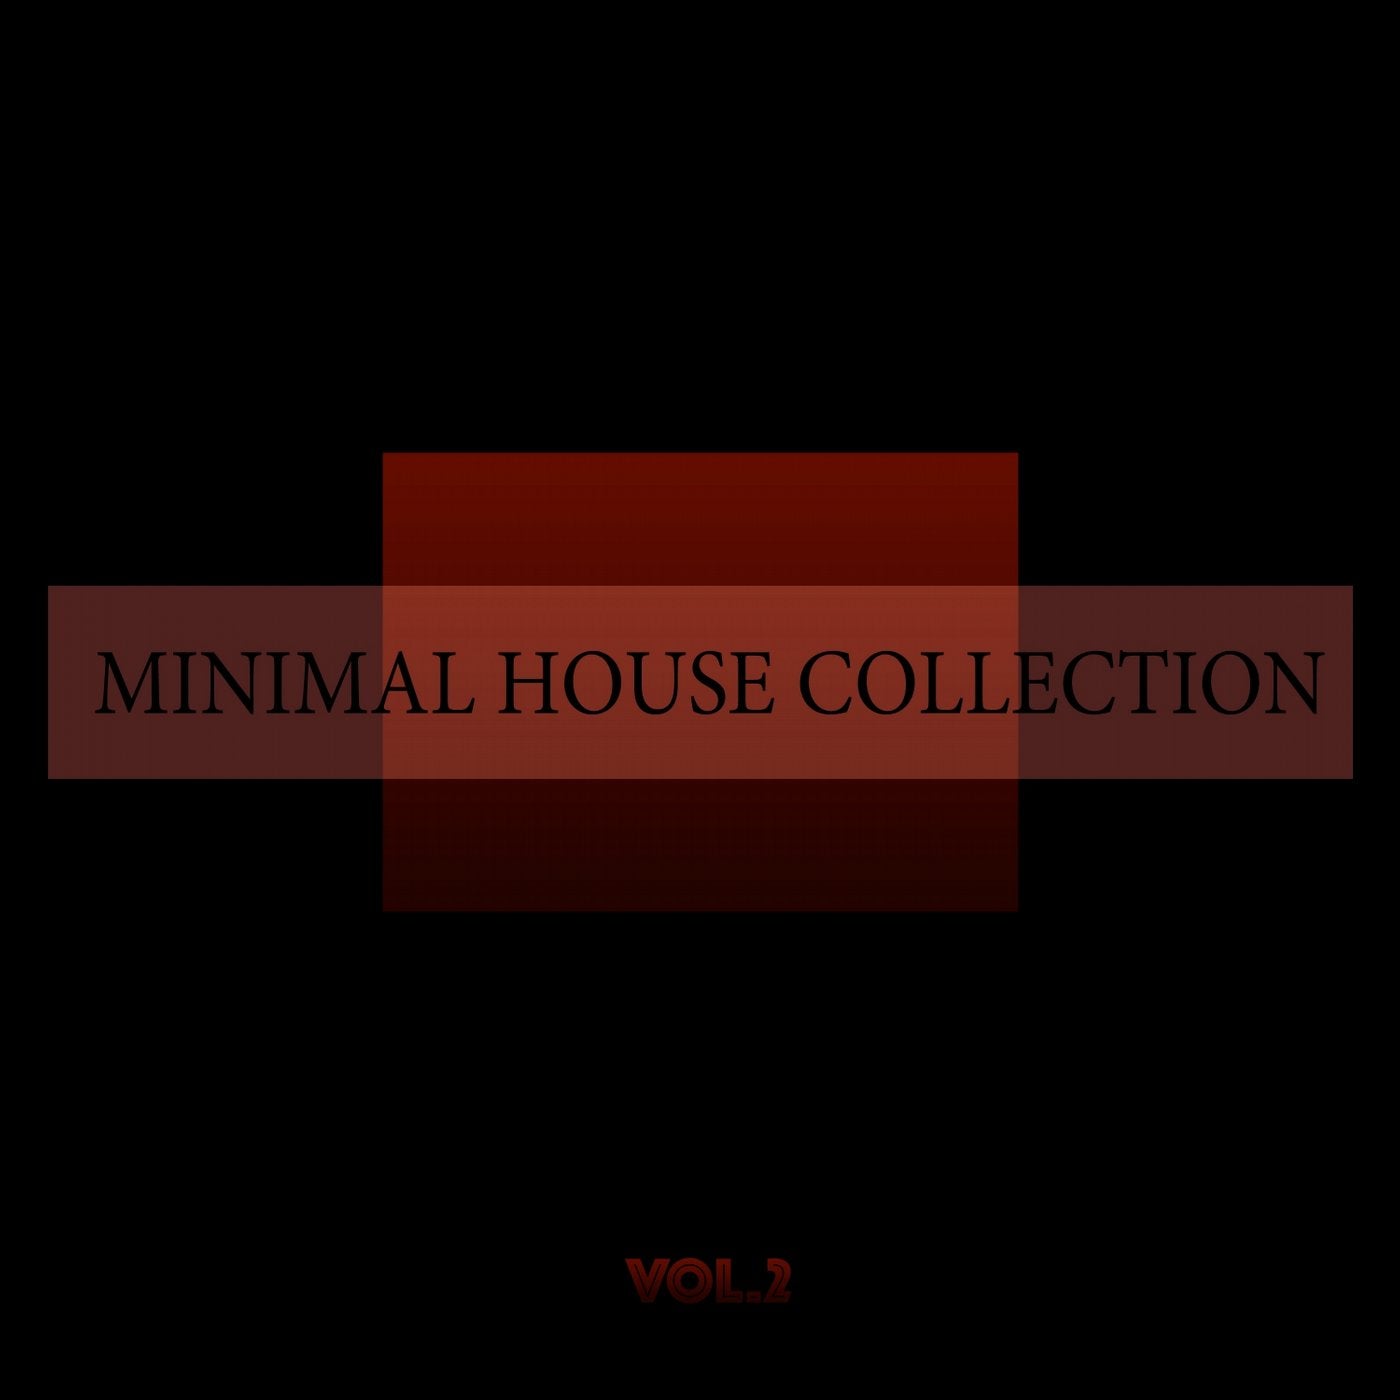 Minimal House Collection Vol. 2